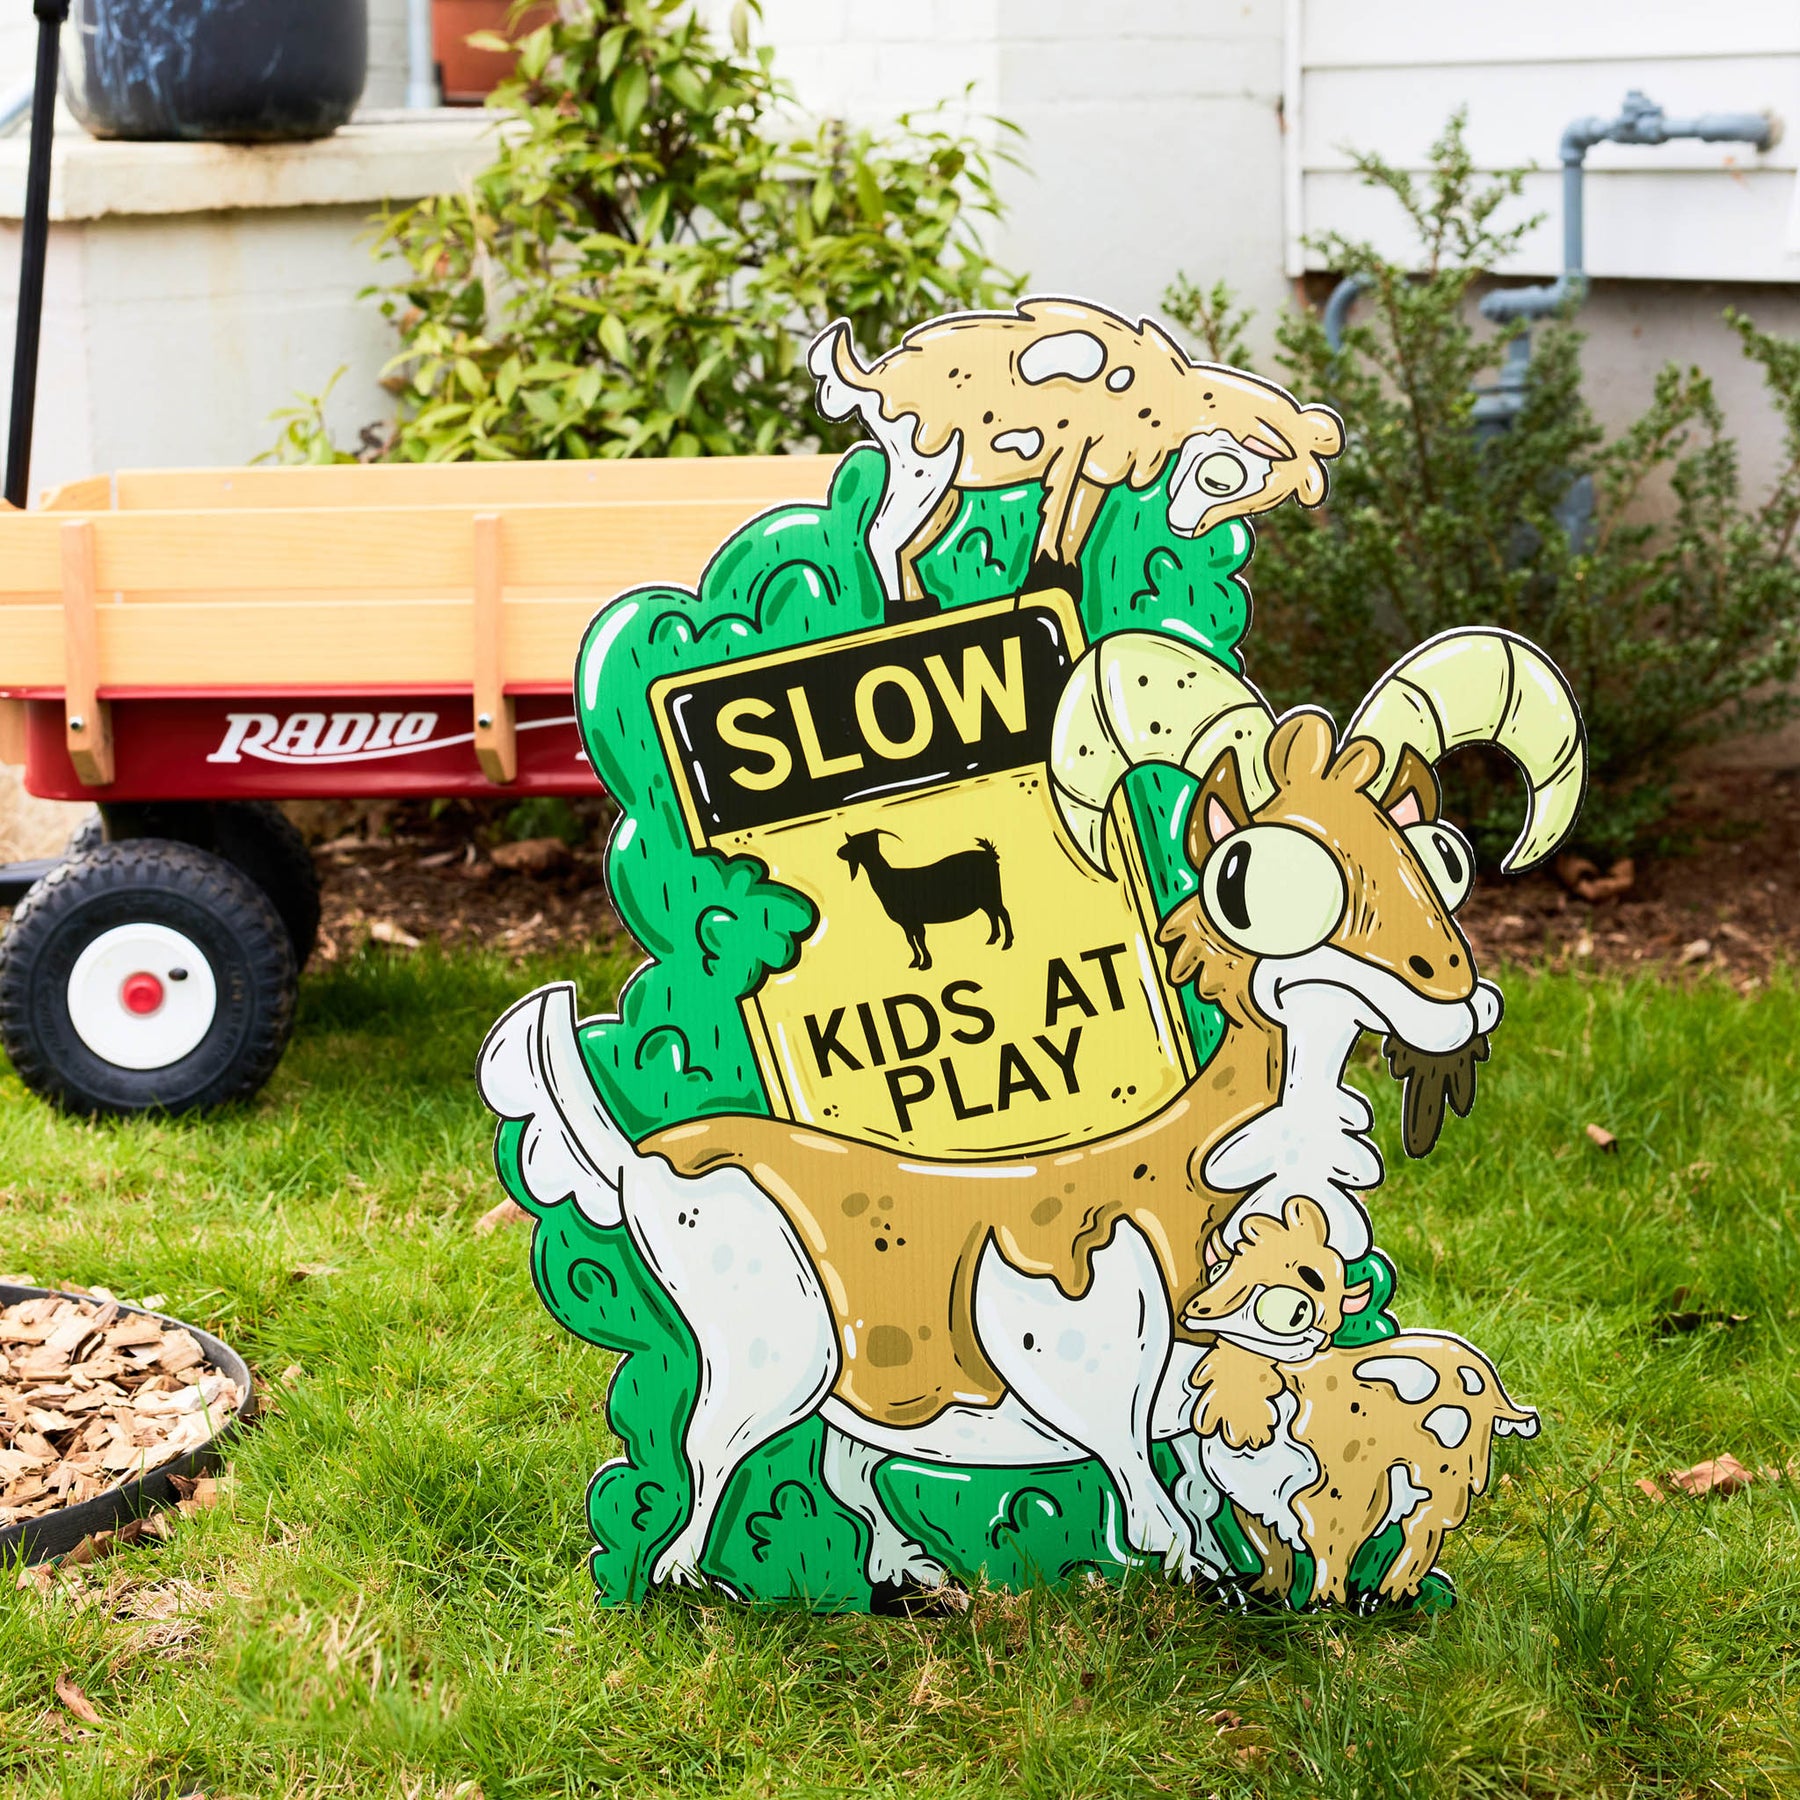 The Goatley Family of Goats | "Kids at Play" Yard Sign